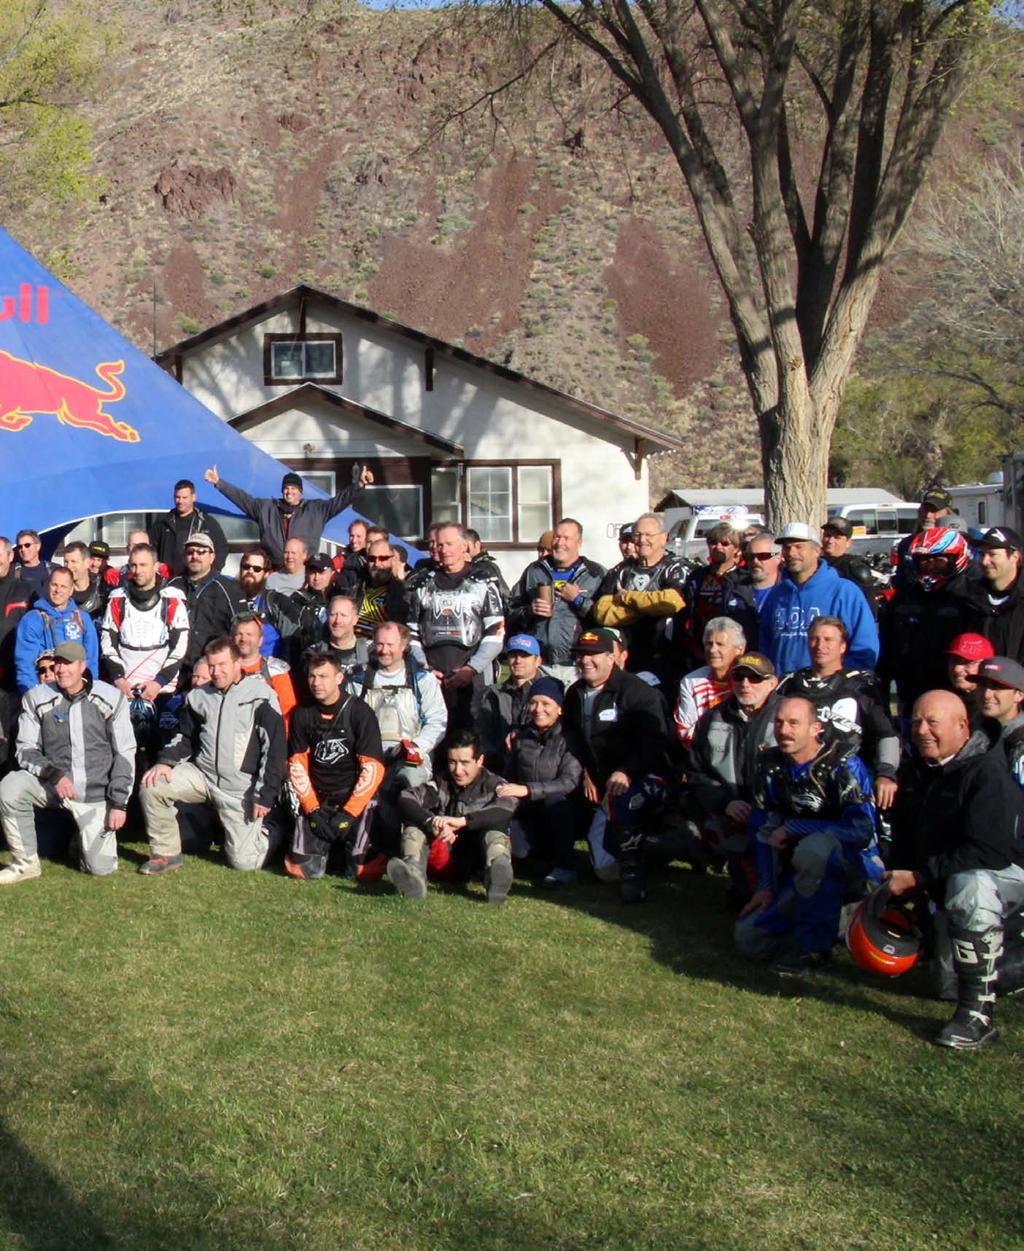 VOL. 51 ISSUE 21 MAY 28, 2014 P95 Approximately 150 riders made it to the event this year.